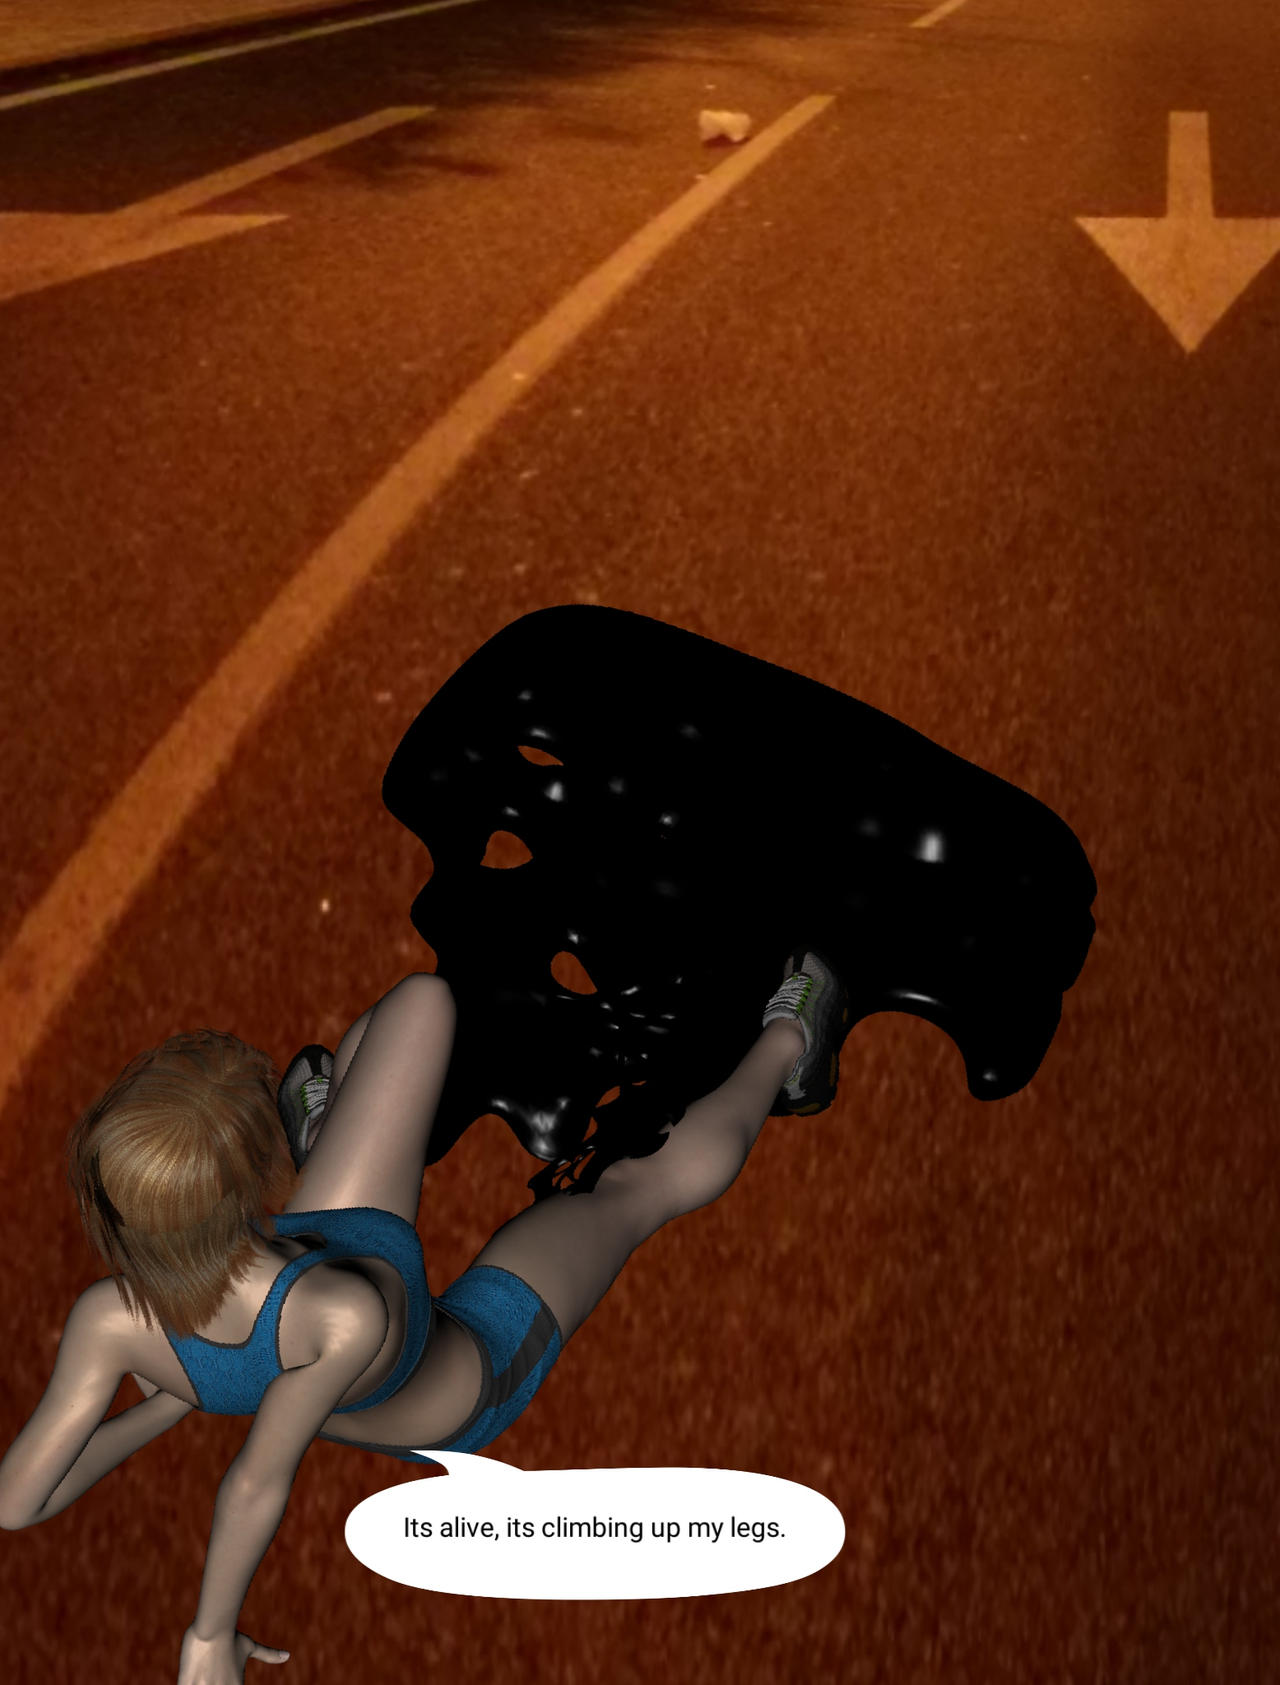 Mary Jane started to panic as the symbiote reached her calves and was inches away from her pussy